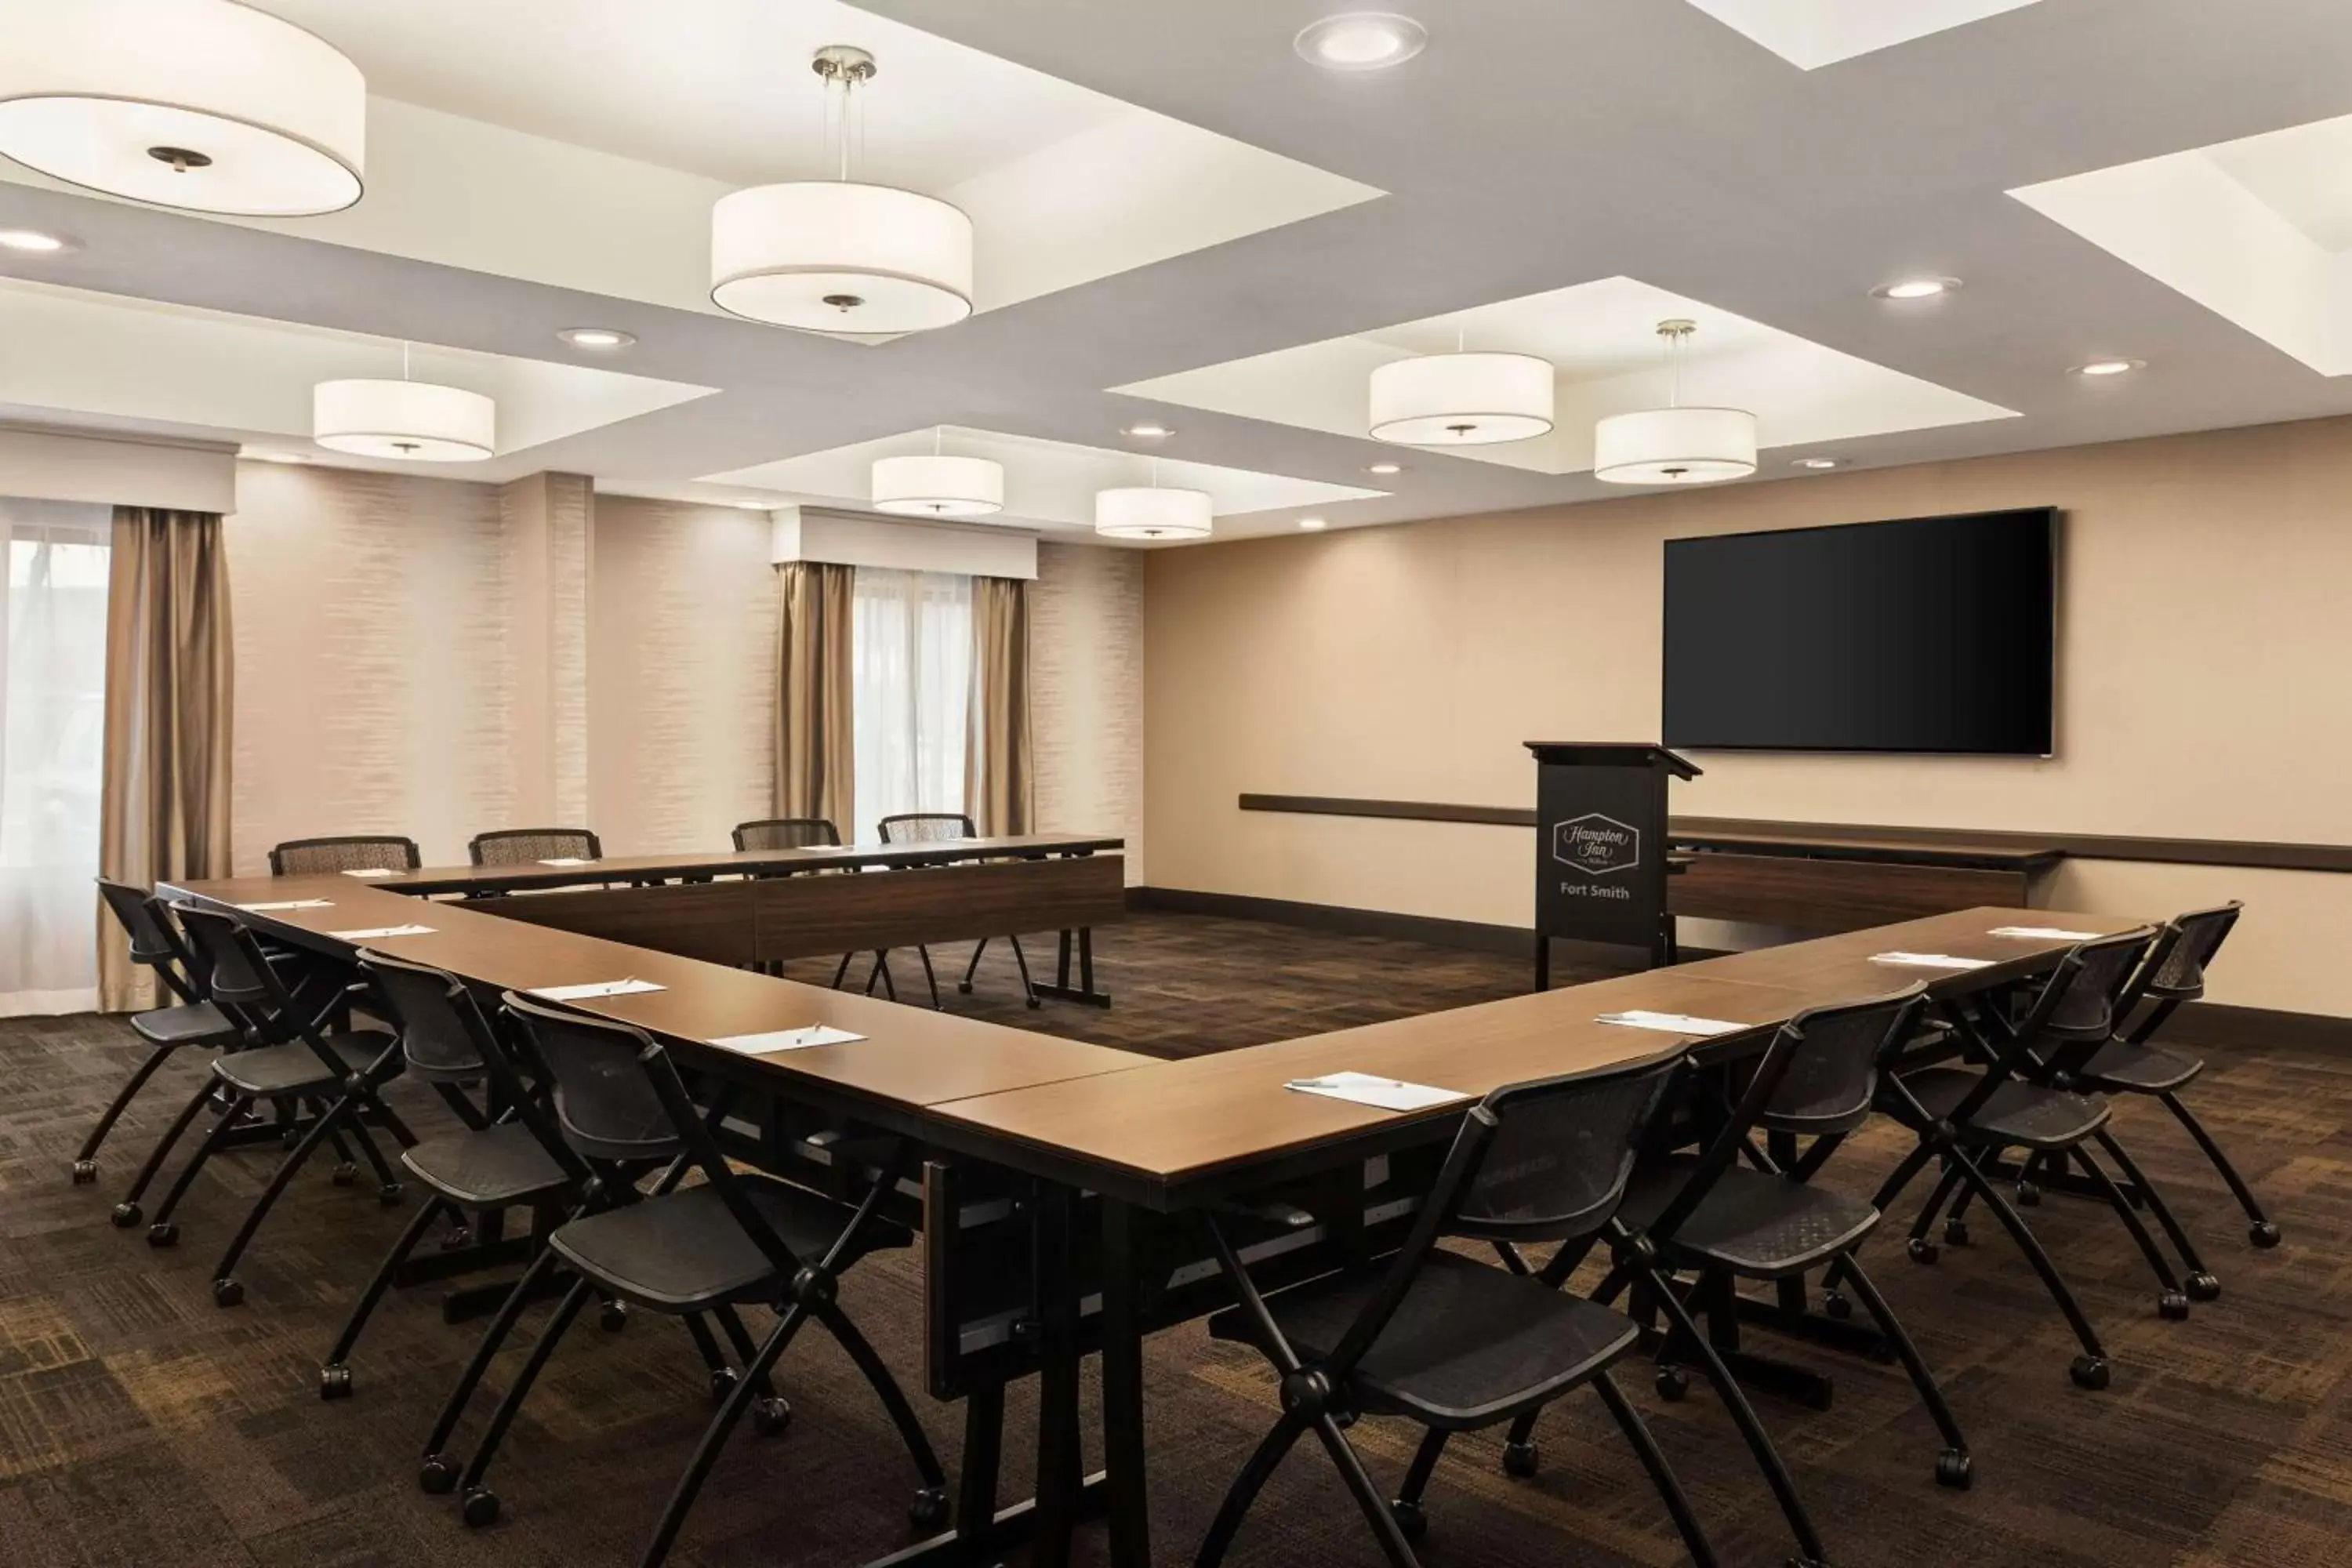 Meeting/conference room in Hampton Inn by Hilton Fort Smith